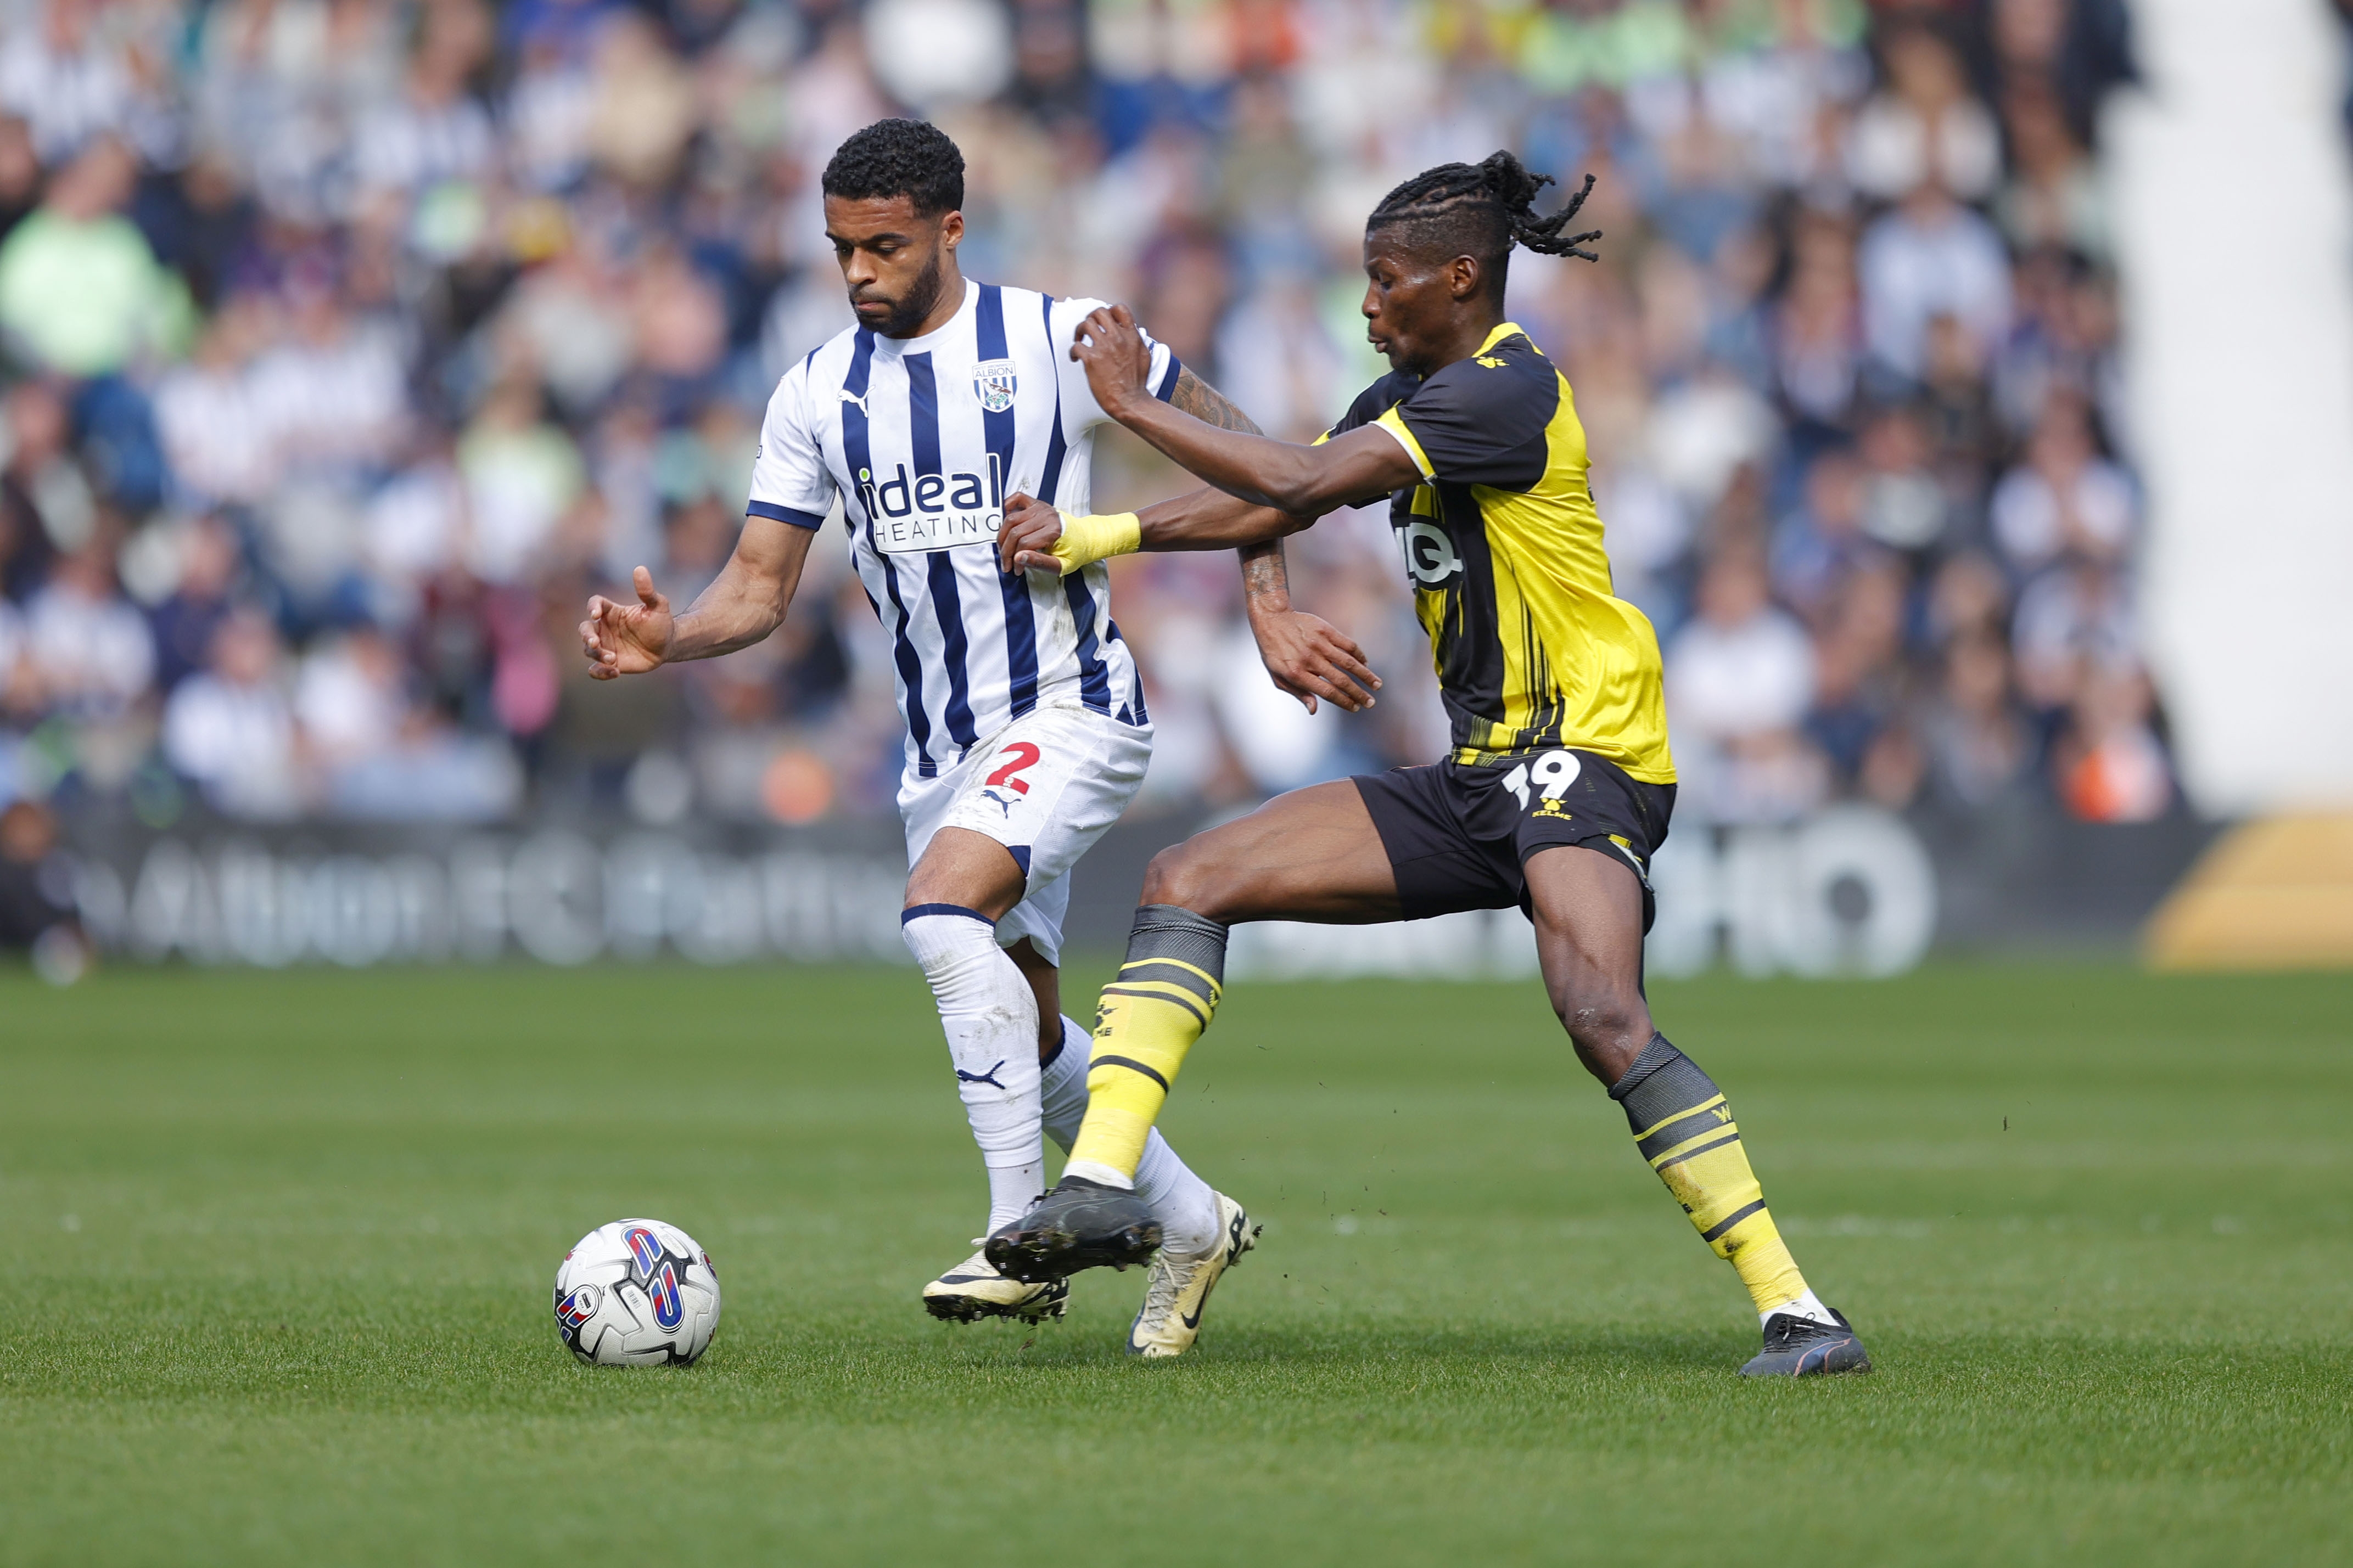 Darnell Furlong on the ball against Watford 